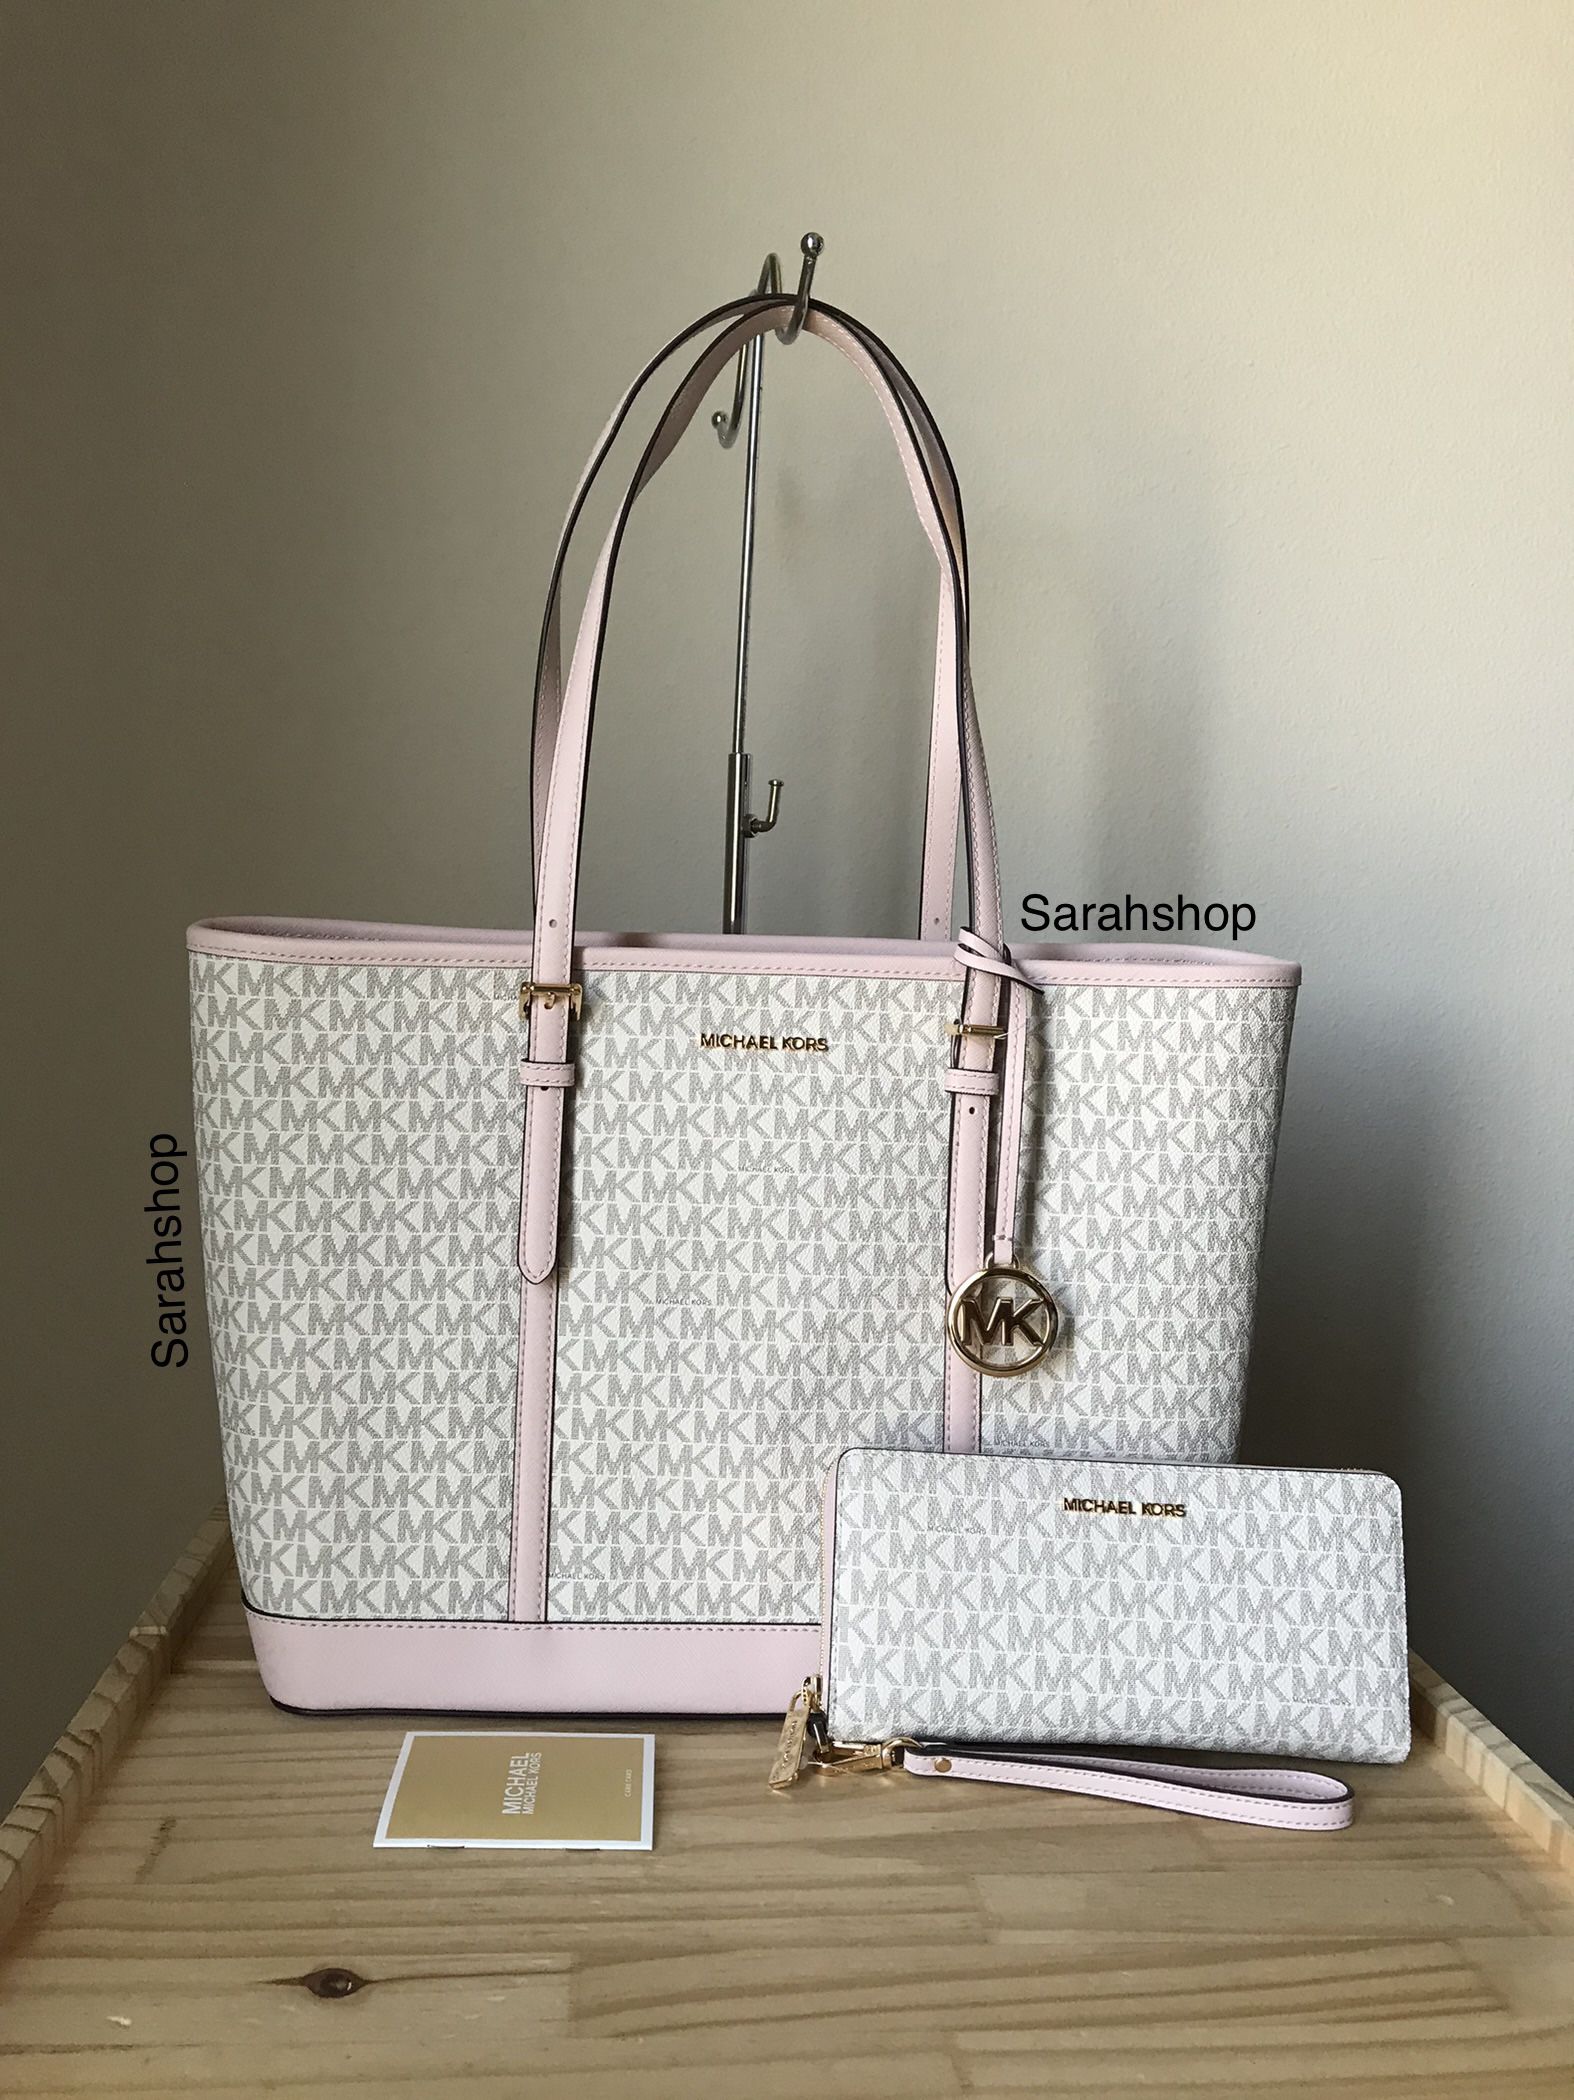 Kate Spade Set for Sale in Palm Shores, FL - OfferUp